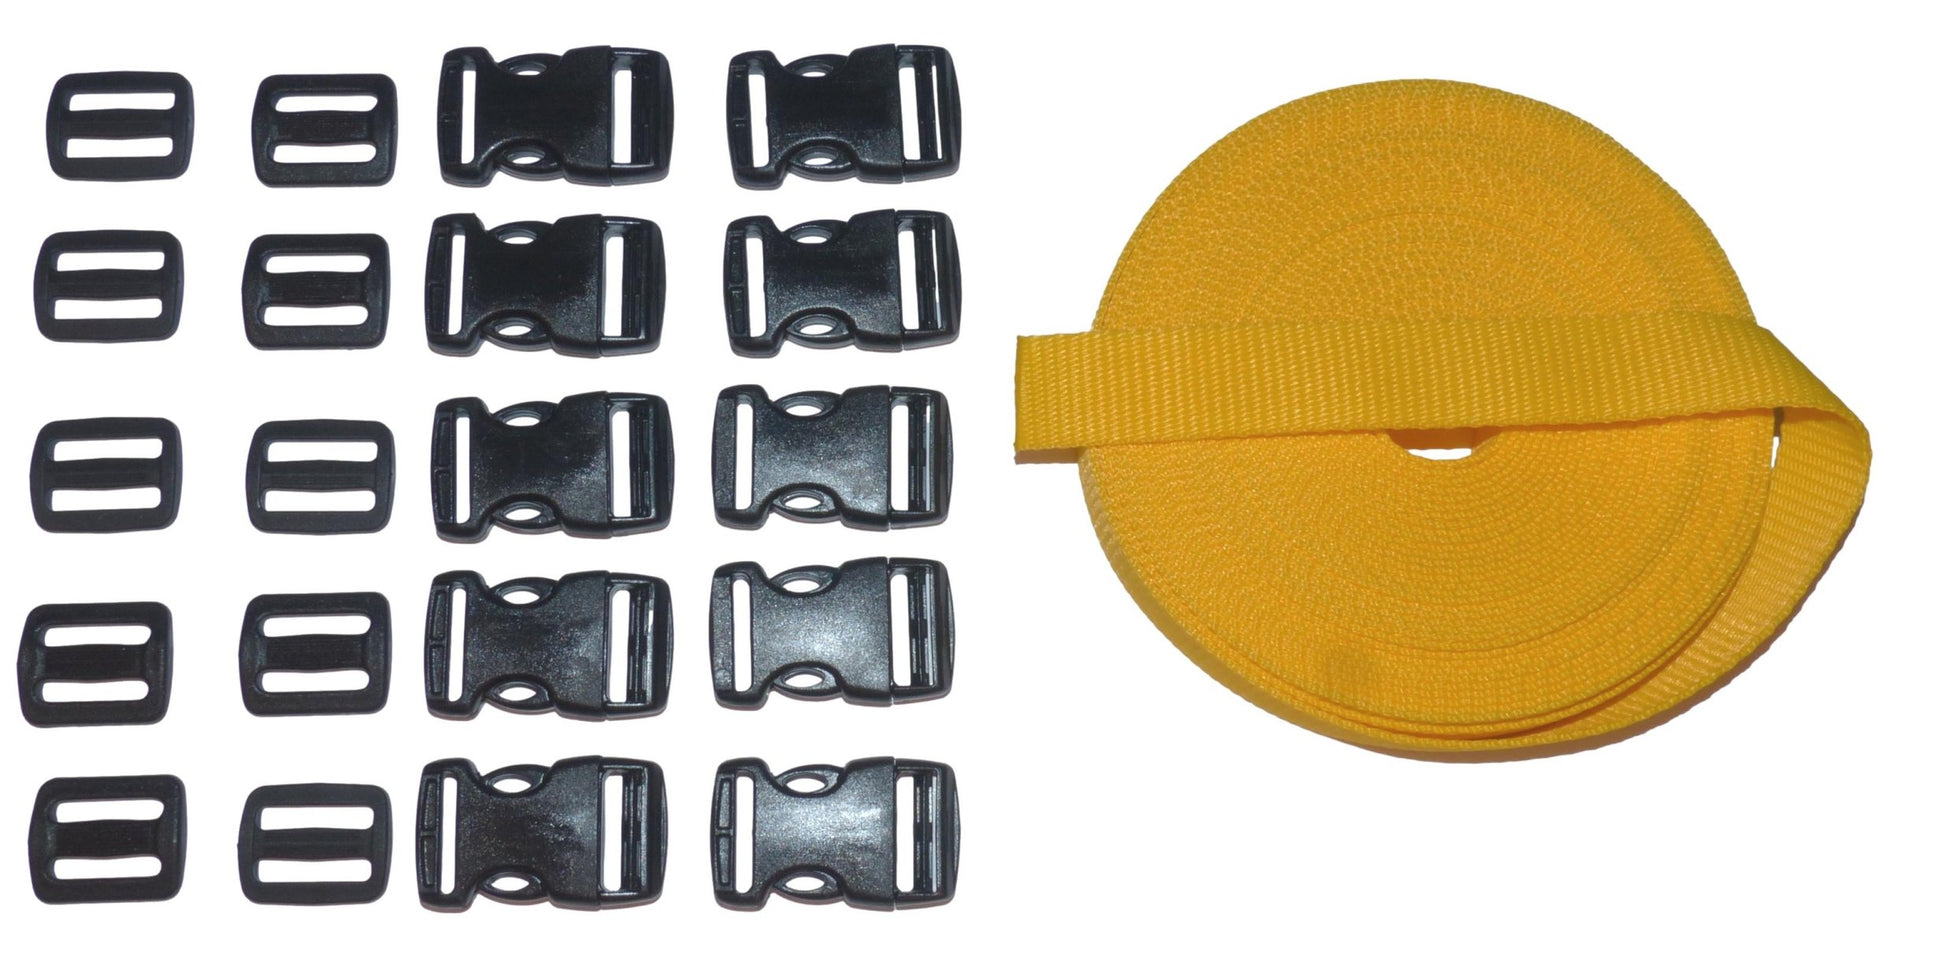 Benristraps 25mm Heavy-Duty Webbing and Branded  Buckle Sets for Straps, Bags, Crafts in yellow